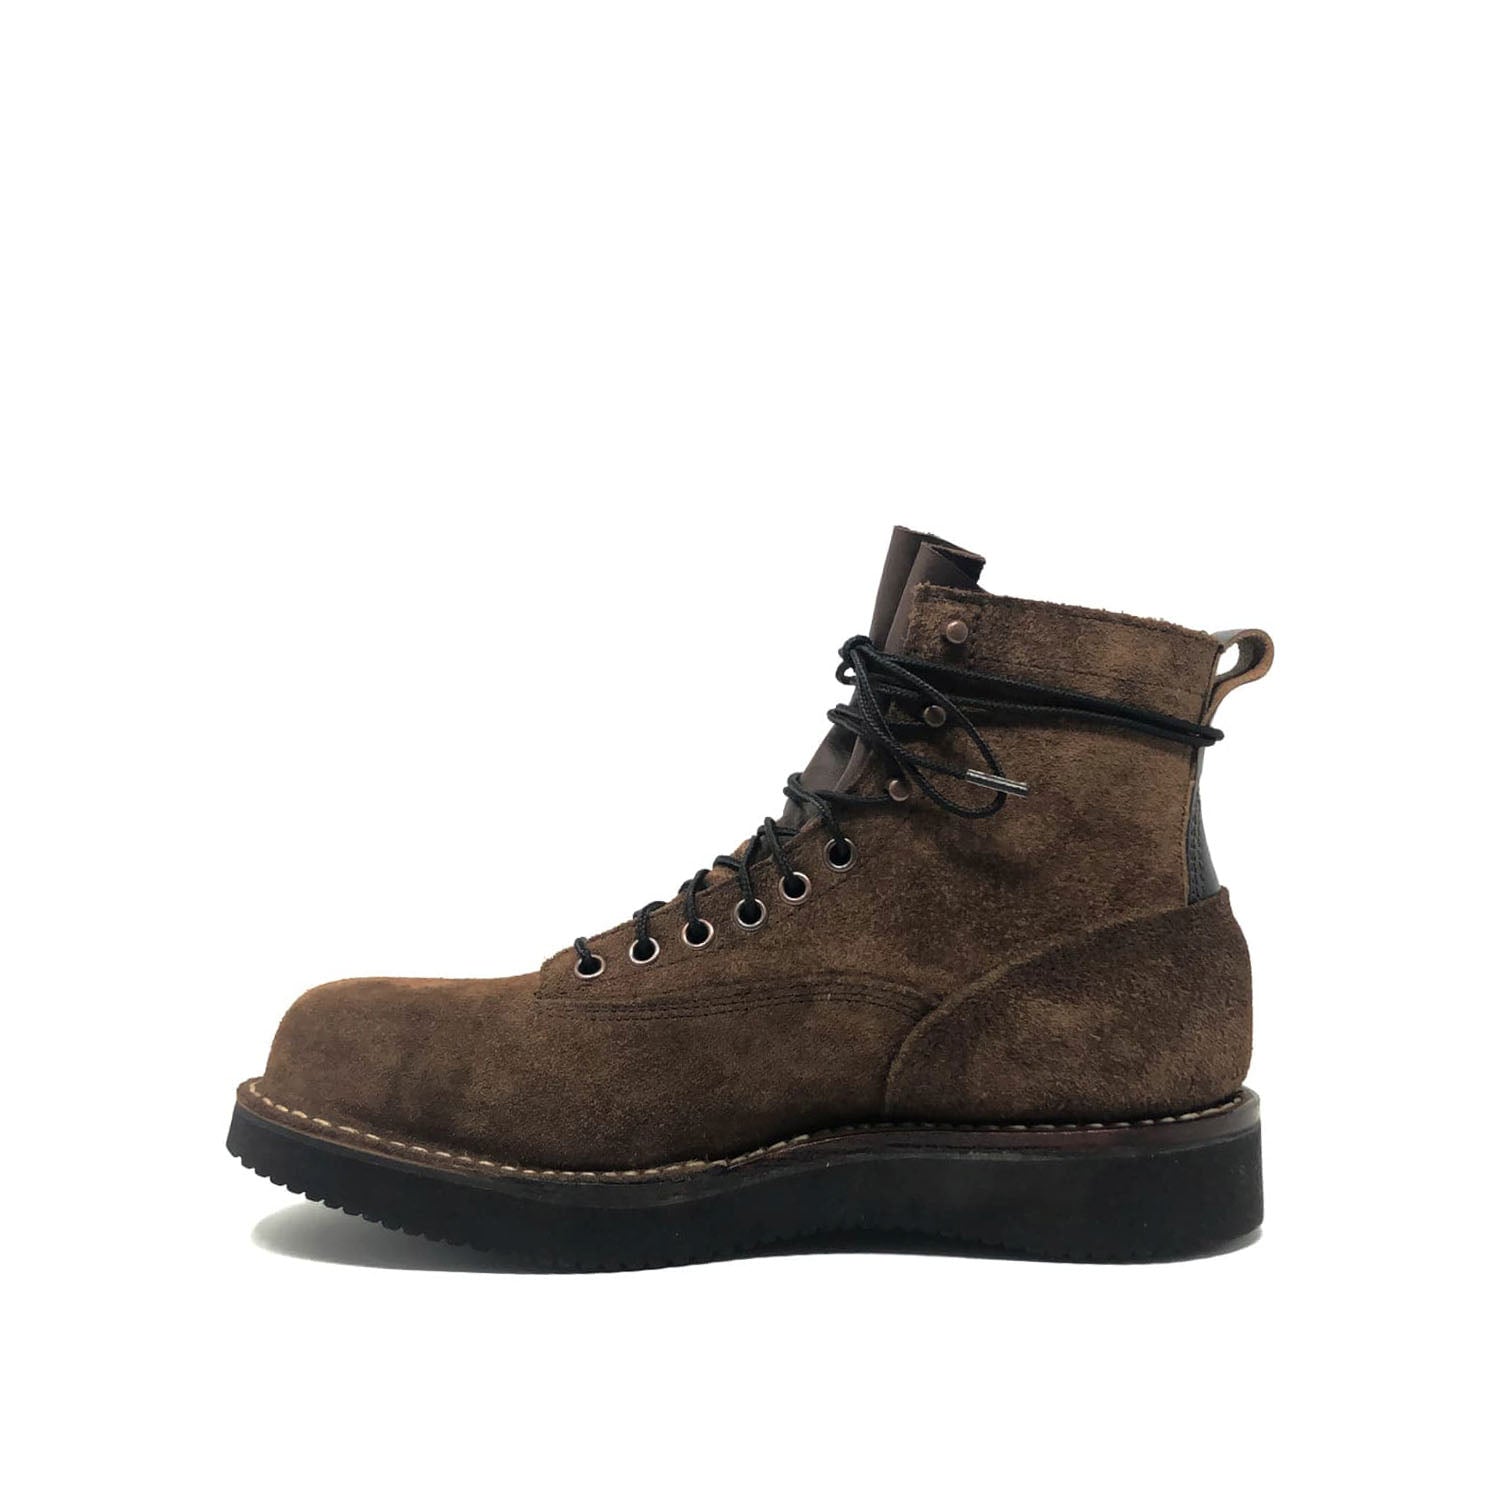 White's Boots x SOP Big Shooter Brown Roughout